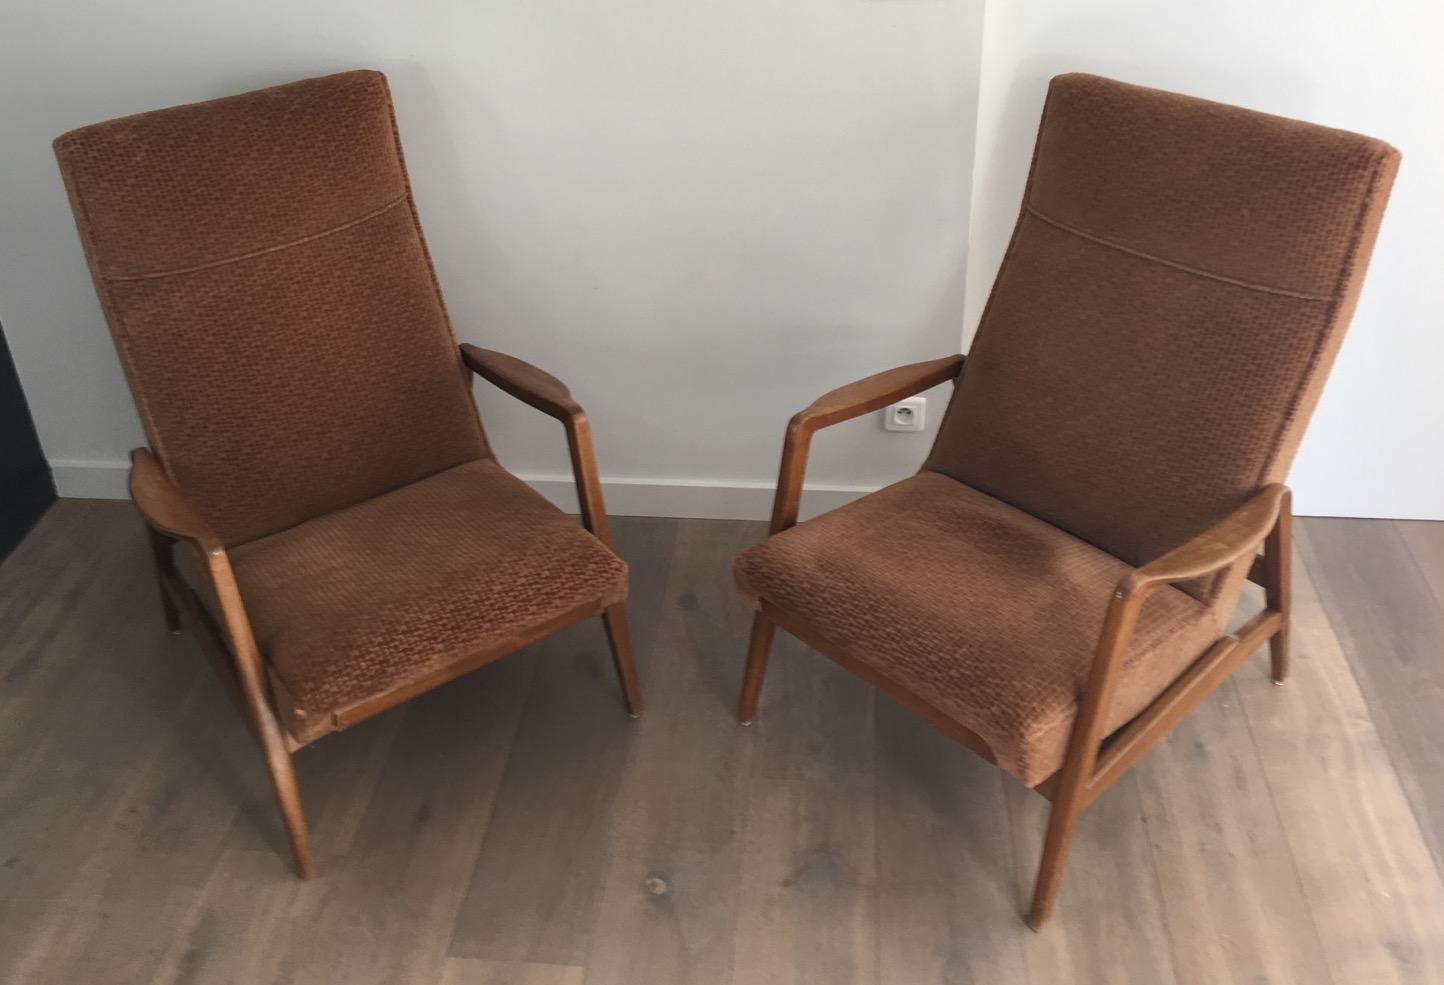 This pair of relax armchairs can be changed into lounge chairs. They are signed Knoll Antimott. The velvet is original. America, circa 1960.